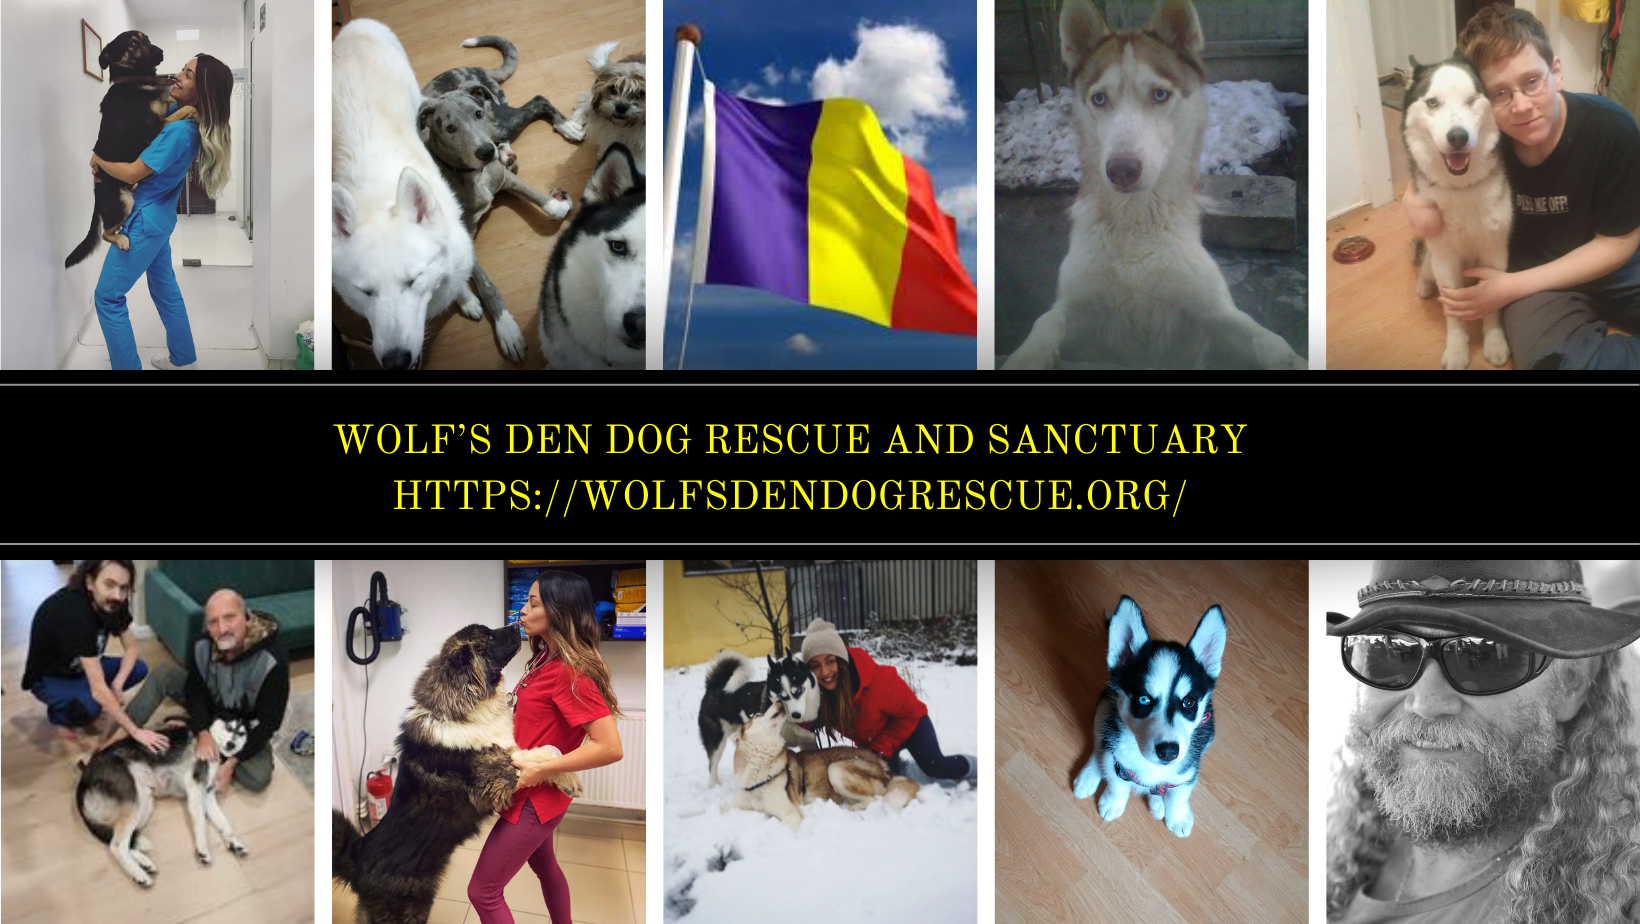 Wolf's Den Dog Rescue and Sanctuary